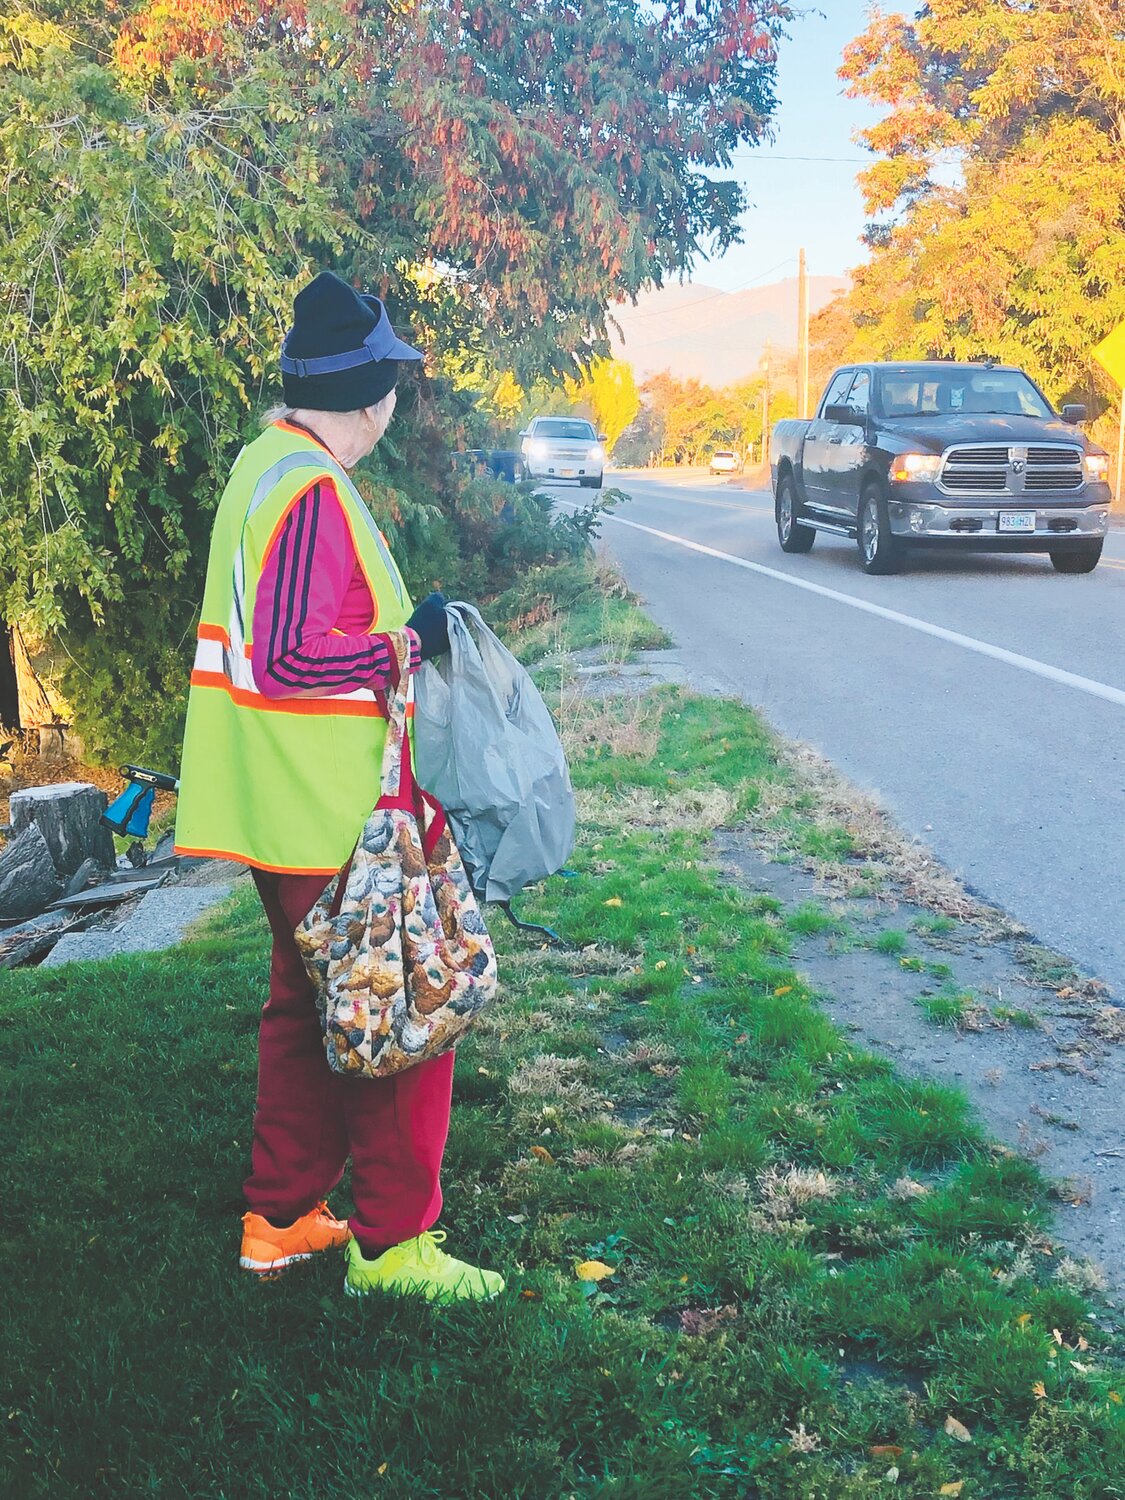 Susan Fisher pictured greeting cars on her daily clean-up route
KATIE LINDERT/WARD MEDIA